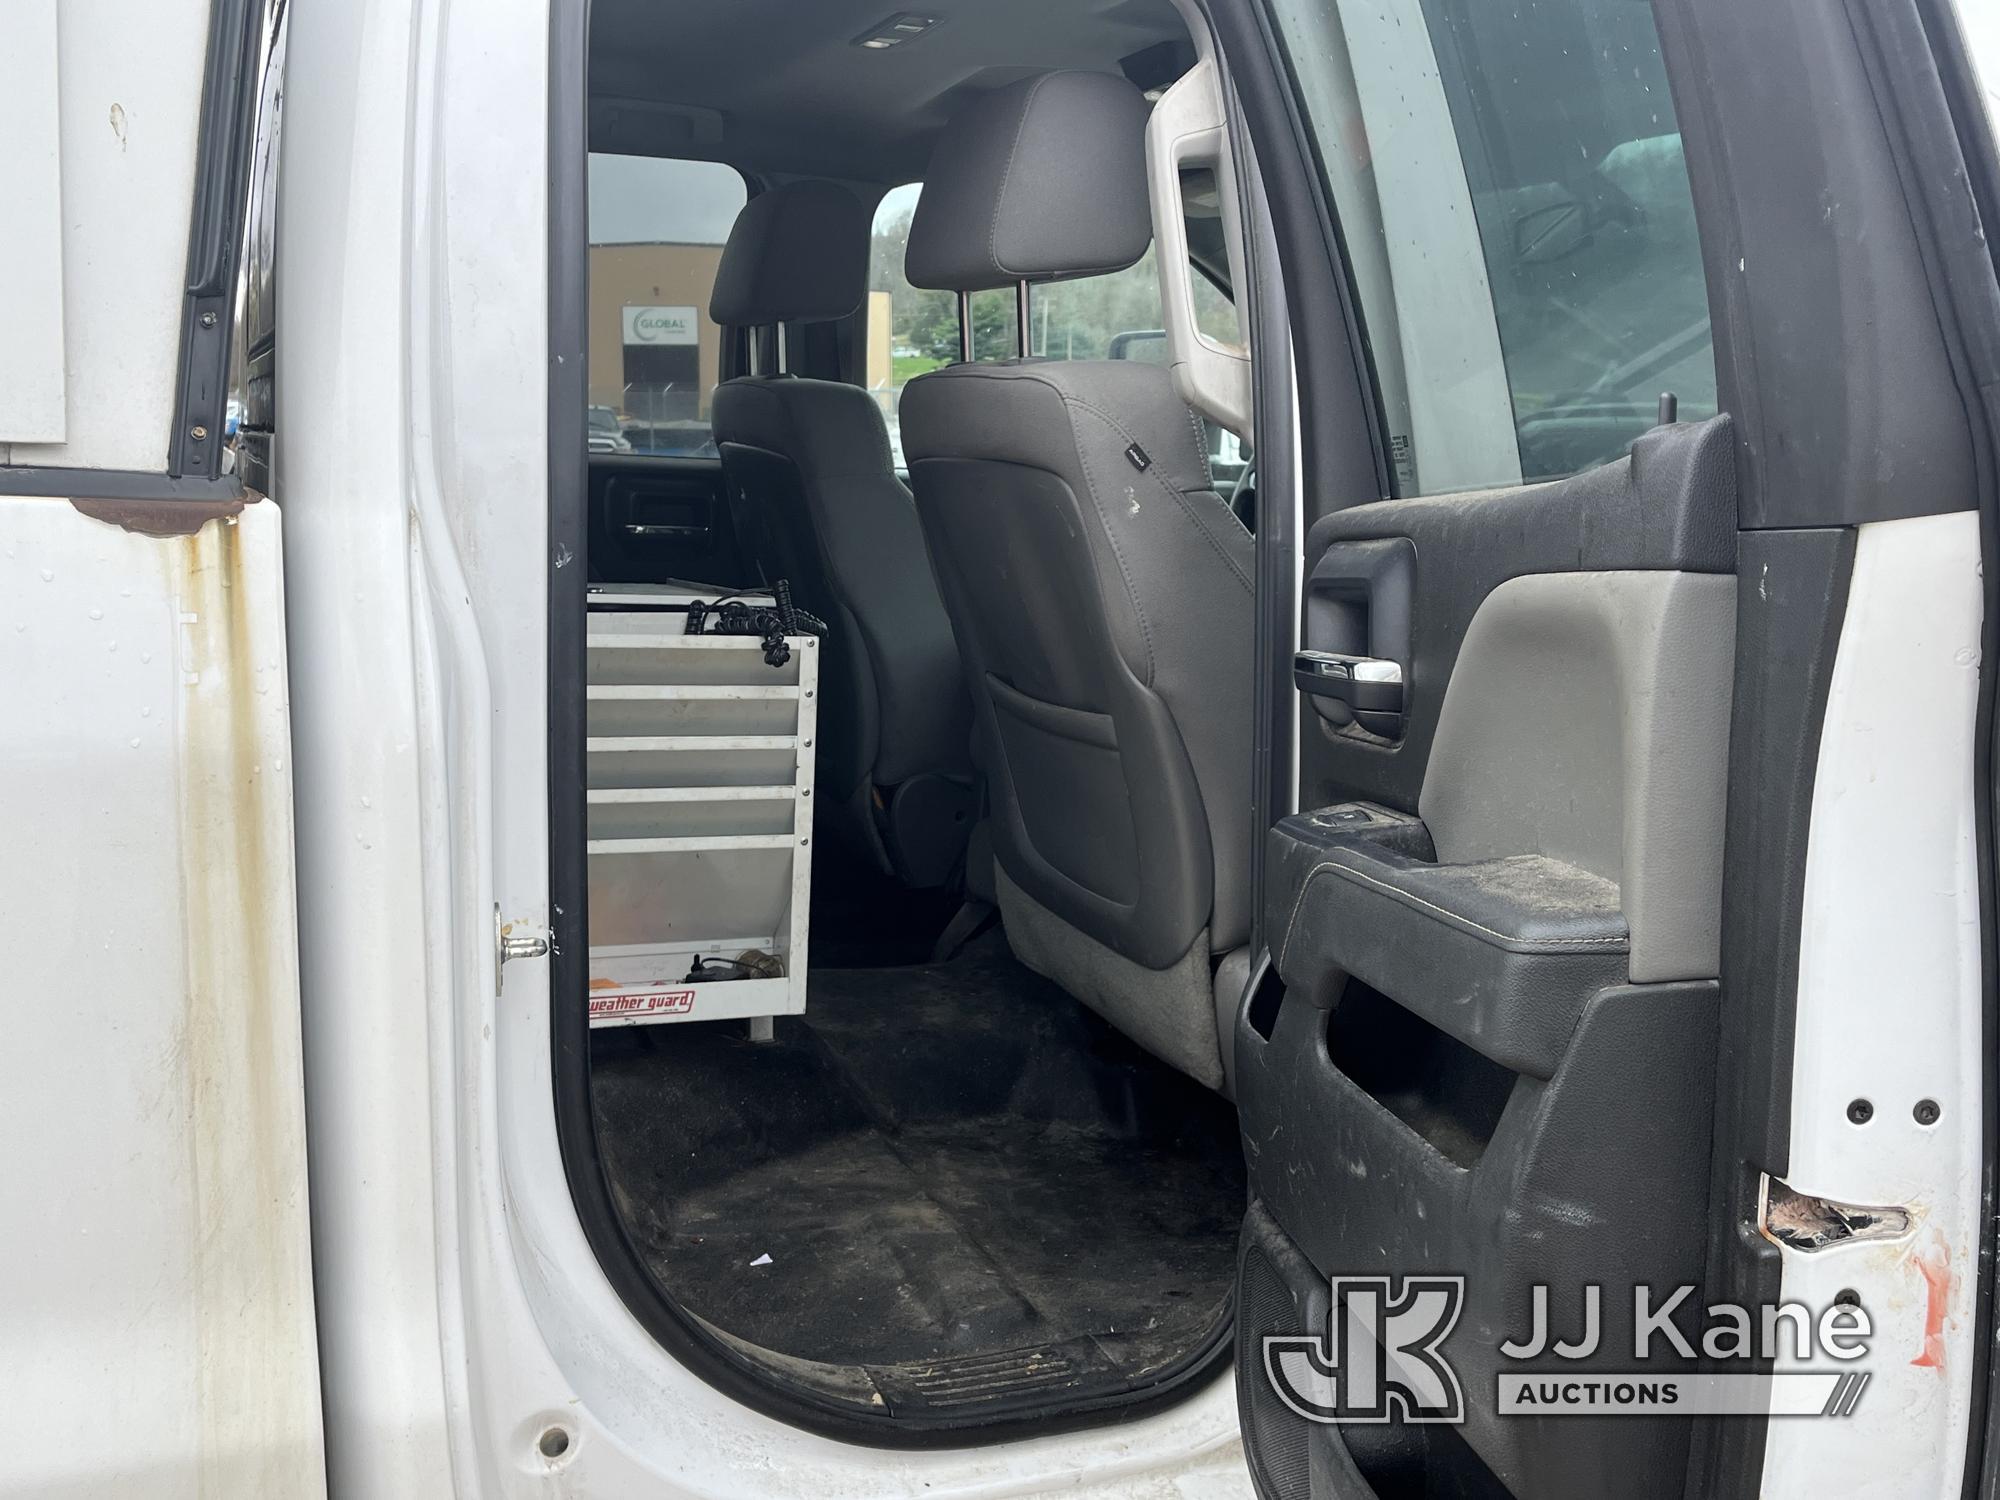 (Smock, PA) 2015 GMC Sierra 2500HD 4x4 Extended-Cab Pickup Truck Title Delay) (Runs & Moves, Rust &